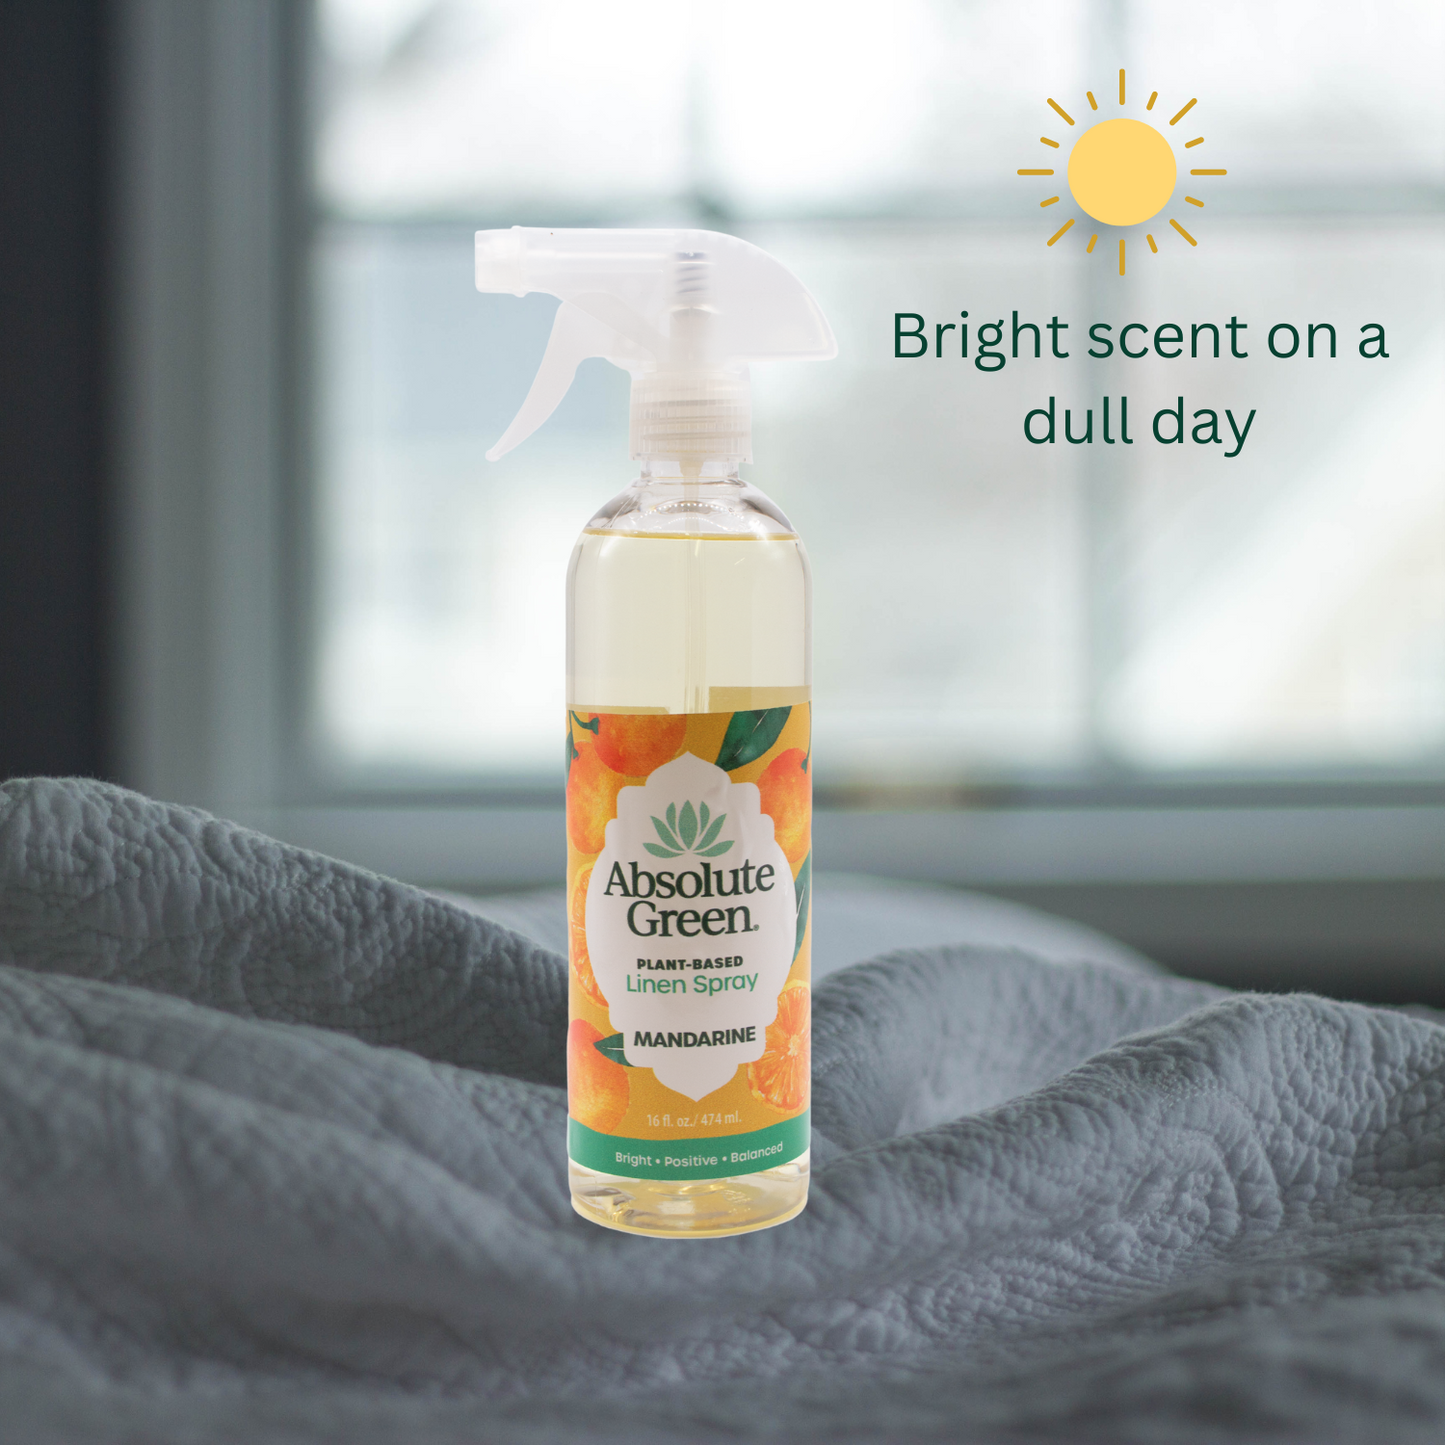 Absolute Green Mandarine is a happy linen spray that can brighten up even a dull day!